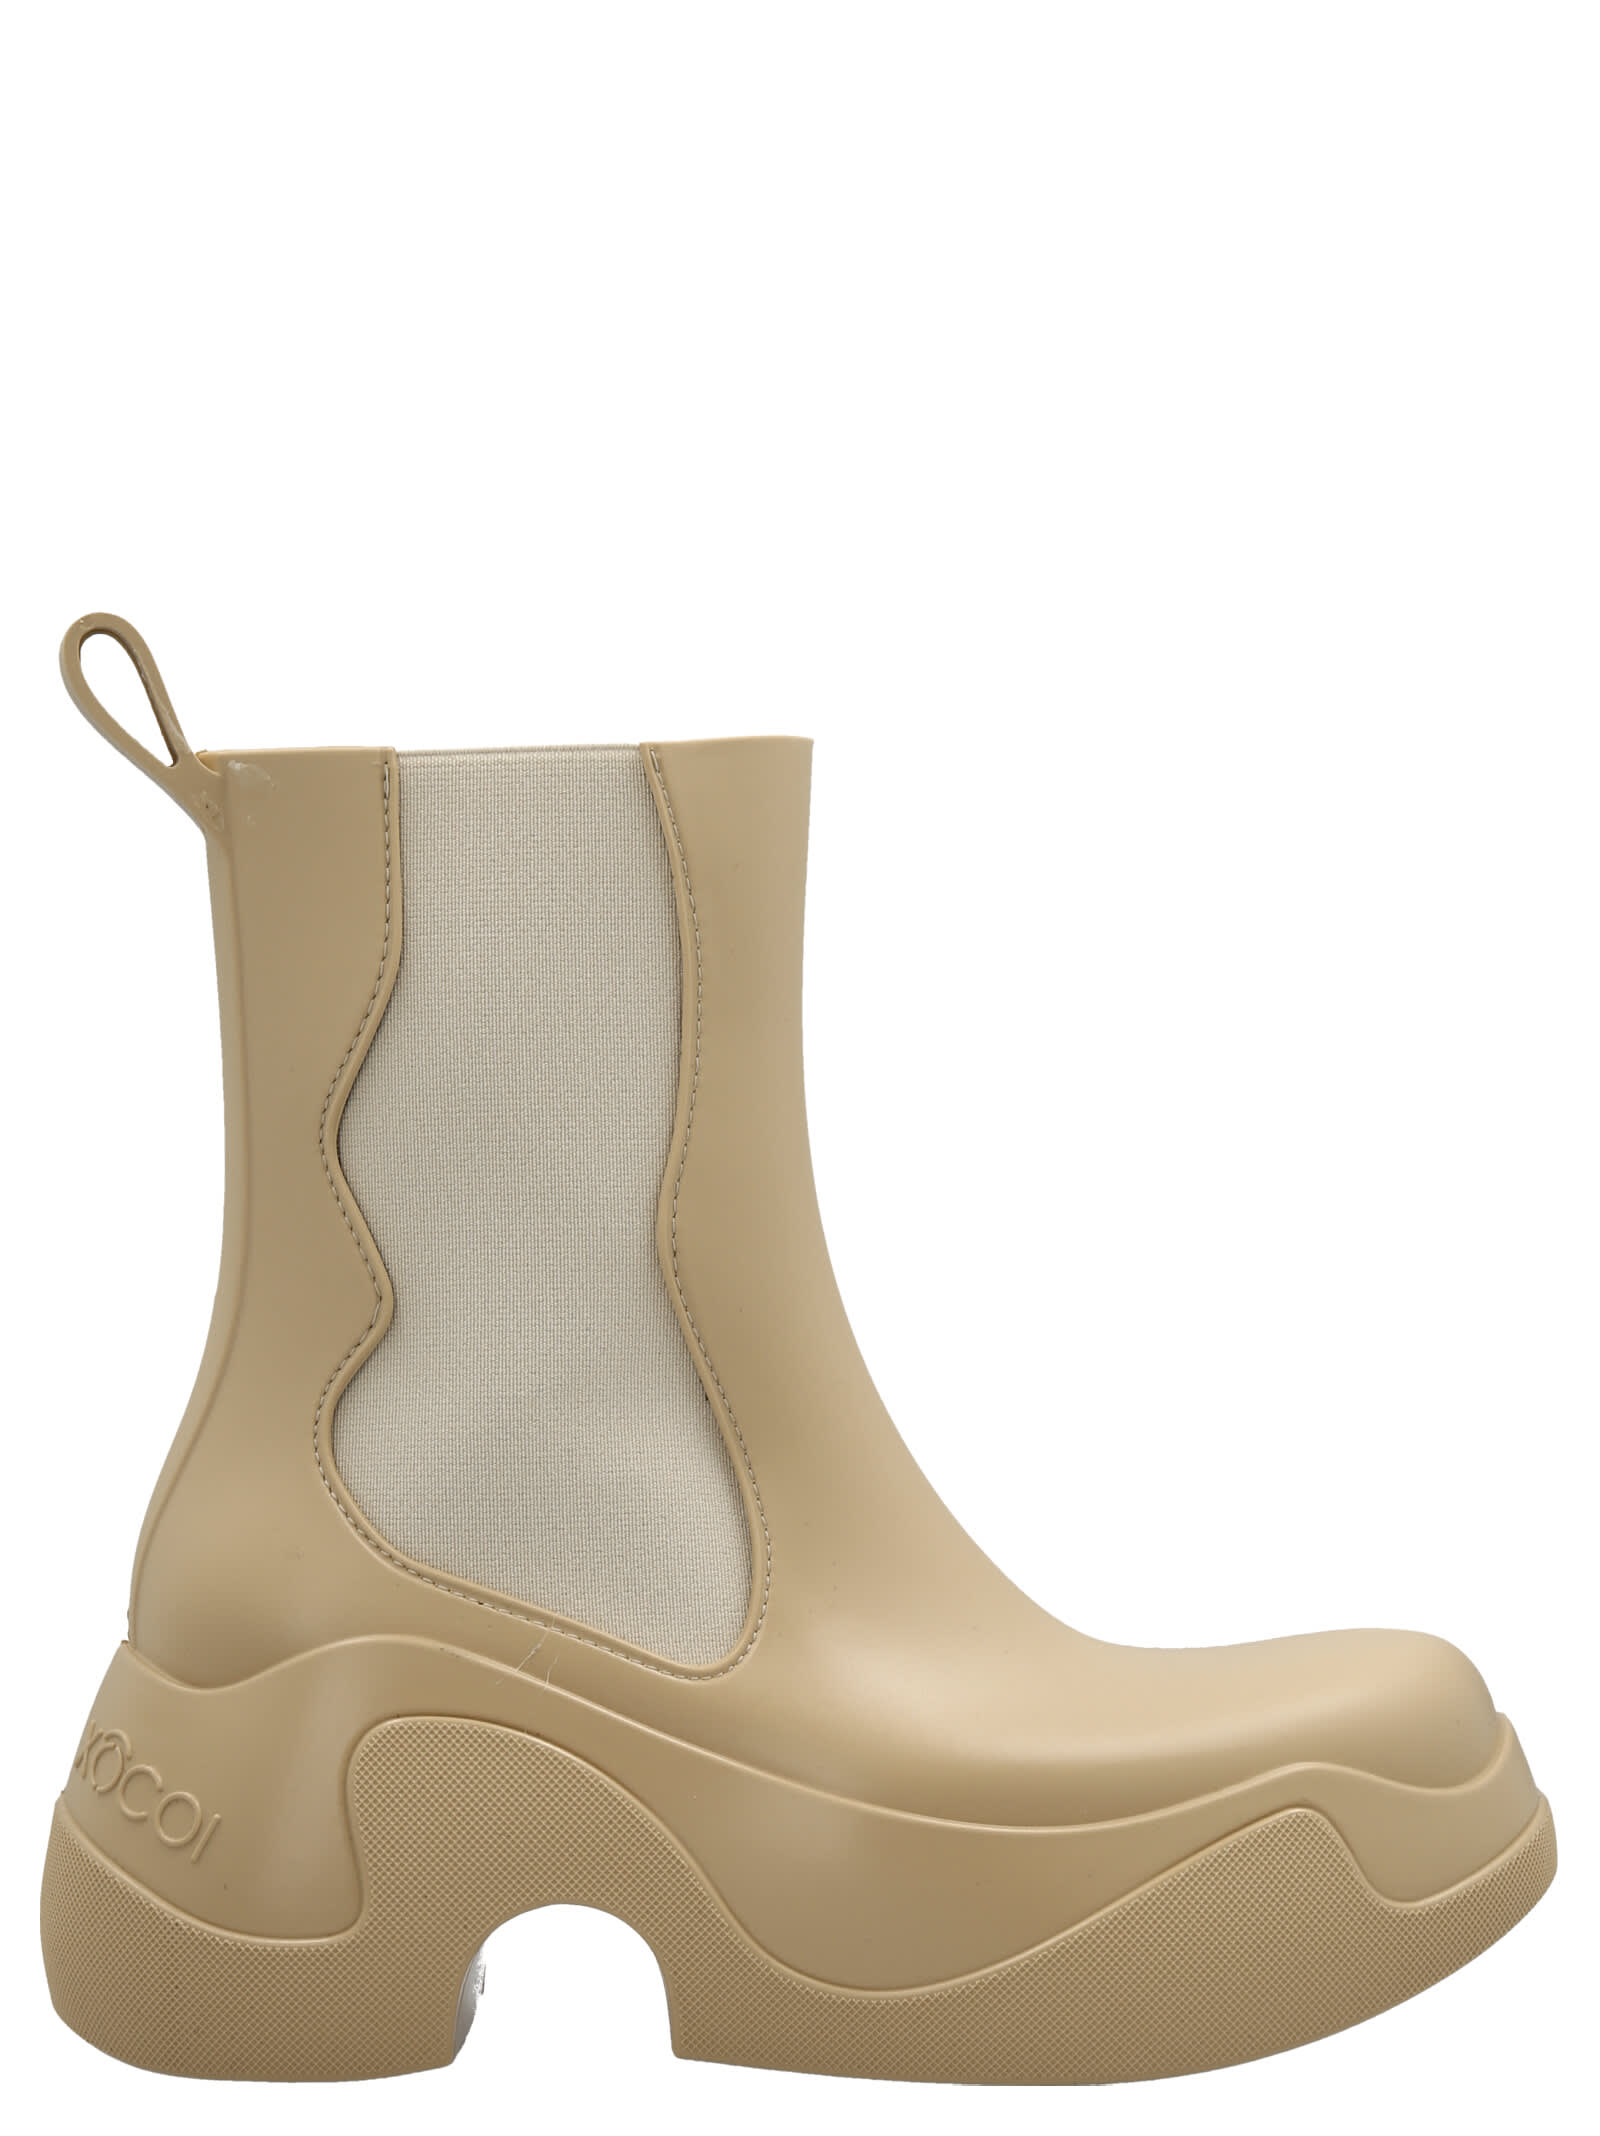 XOCOI MEDIUM RUBBER ANKLE BOOTS